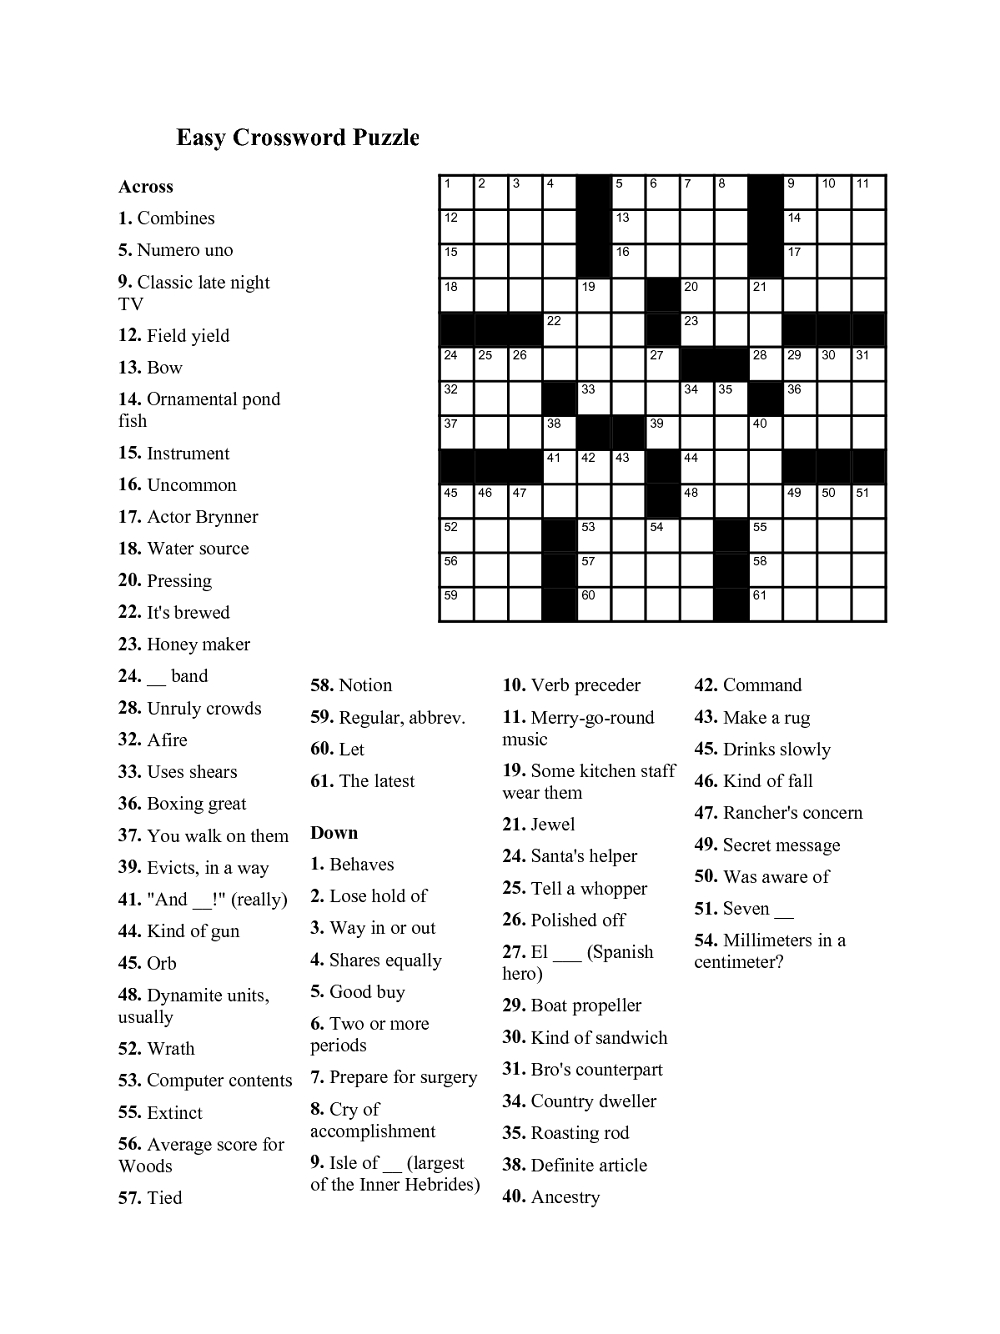 Easy Crossword Puzzles For Senior Activity | Kiddo Shelter - Simple Crossword Puzzles Printable